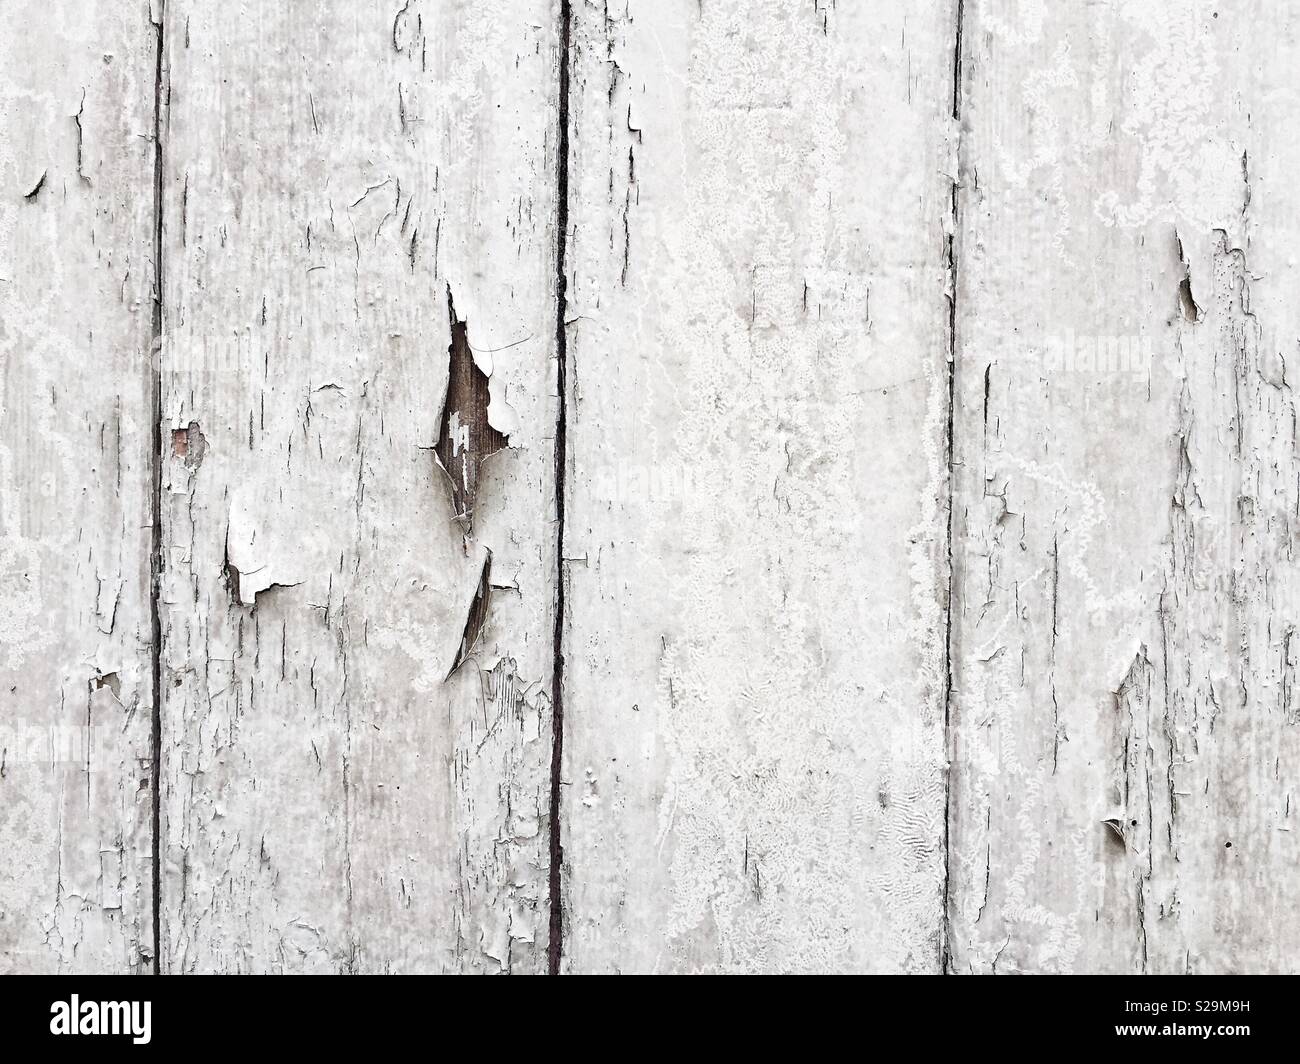 A textured wood background image of wooden boards with cracked and blistering white paint Stock Photo